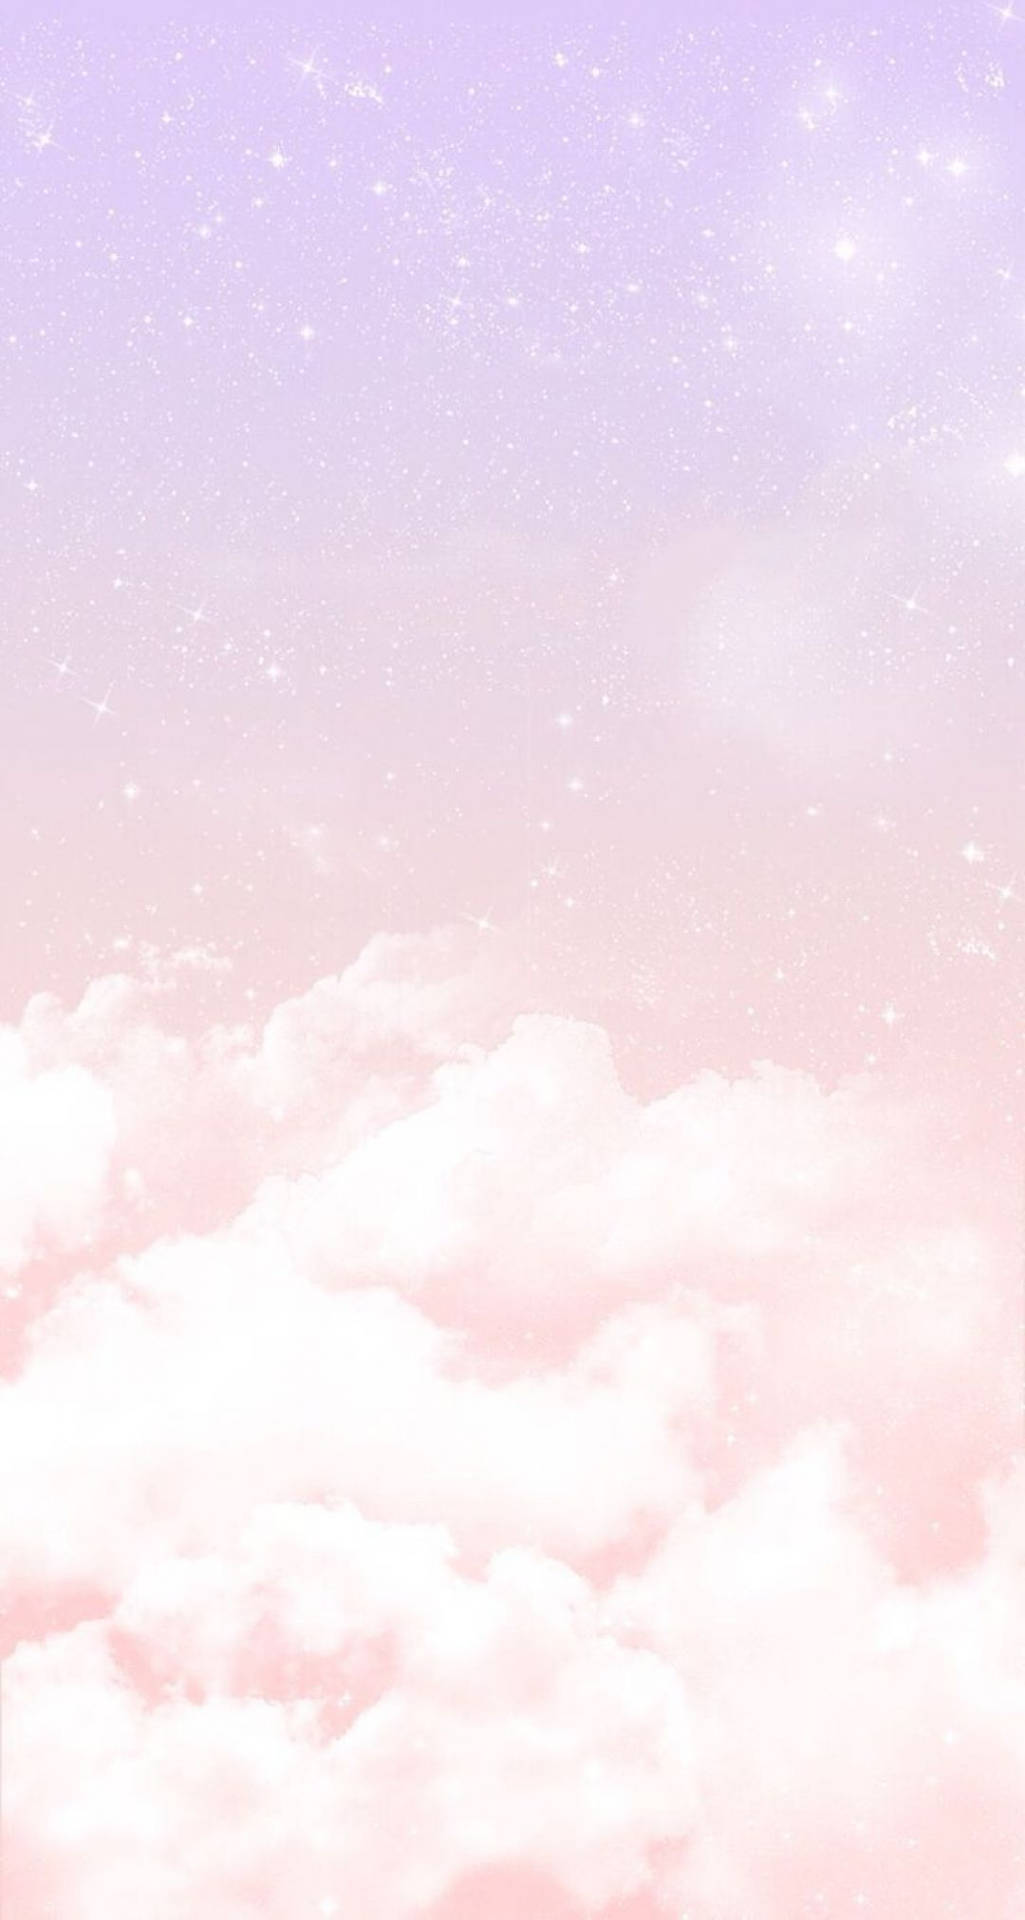 Pastel Ipad Pink Clouds With Sparkling Stars Background